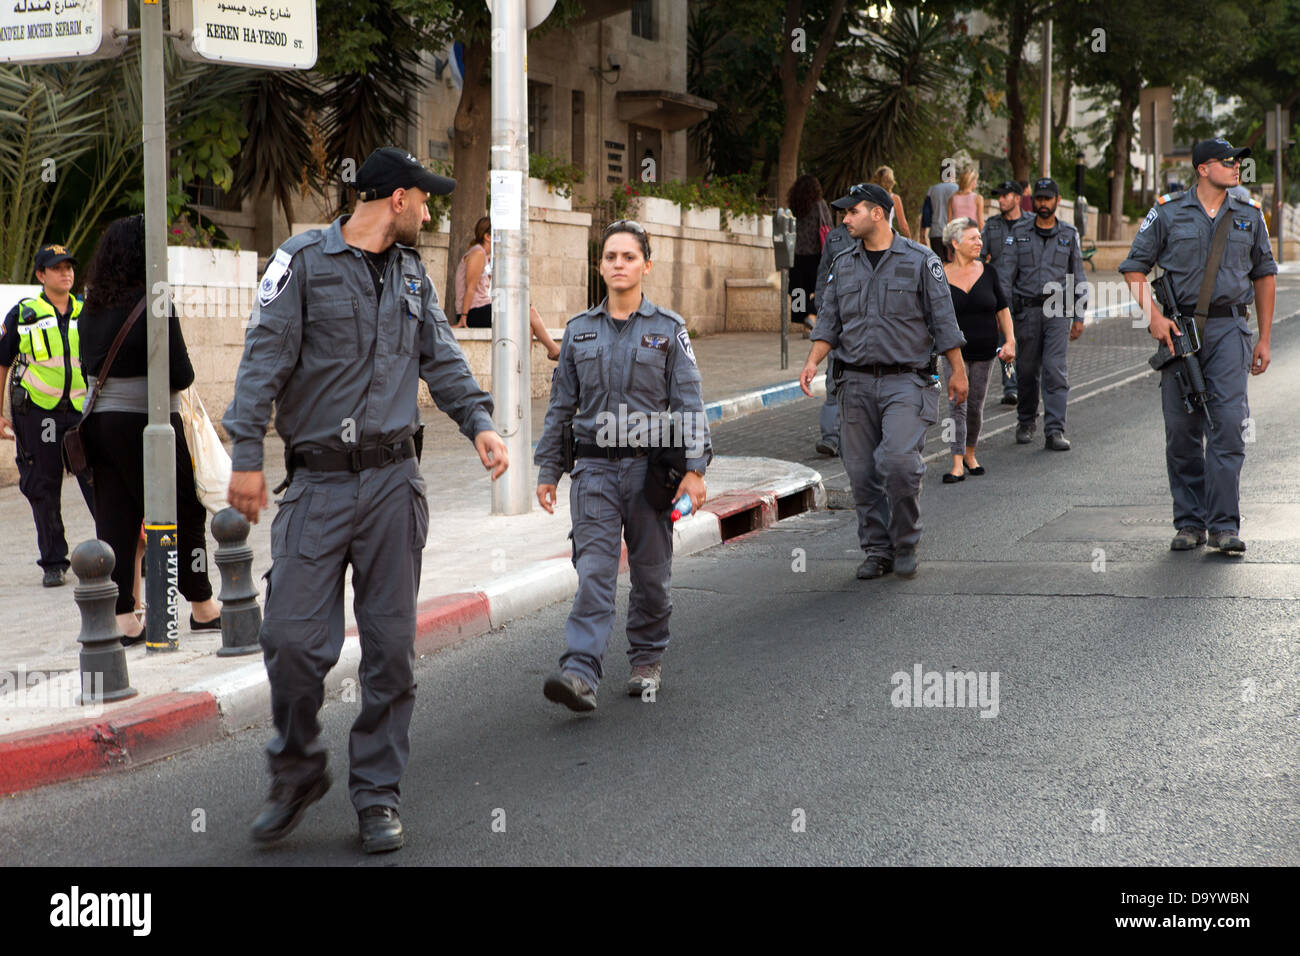 Police providing security to the Gay pride parade in Jerusalem, Israel at year 2012 Stock Photo